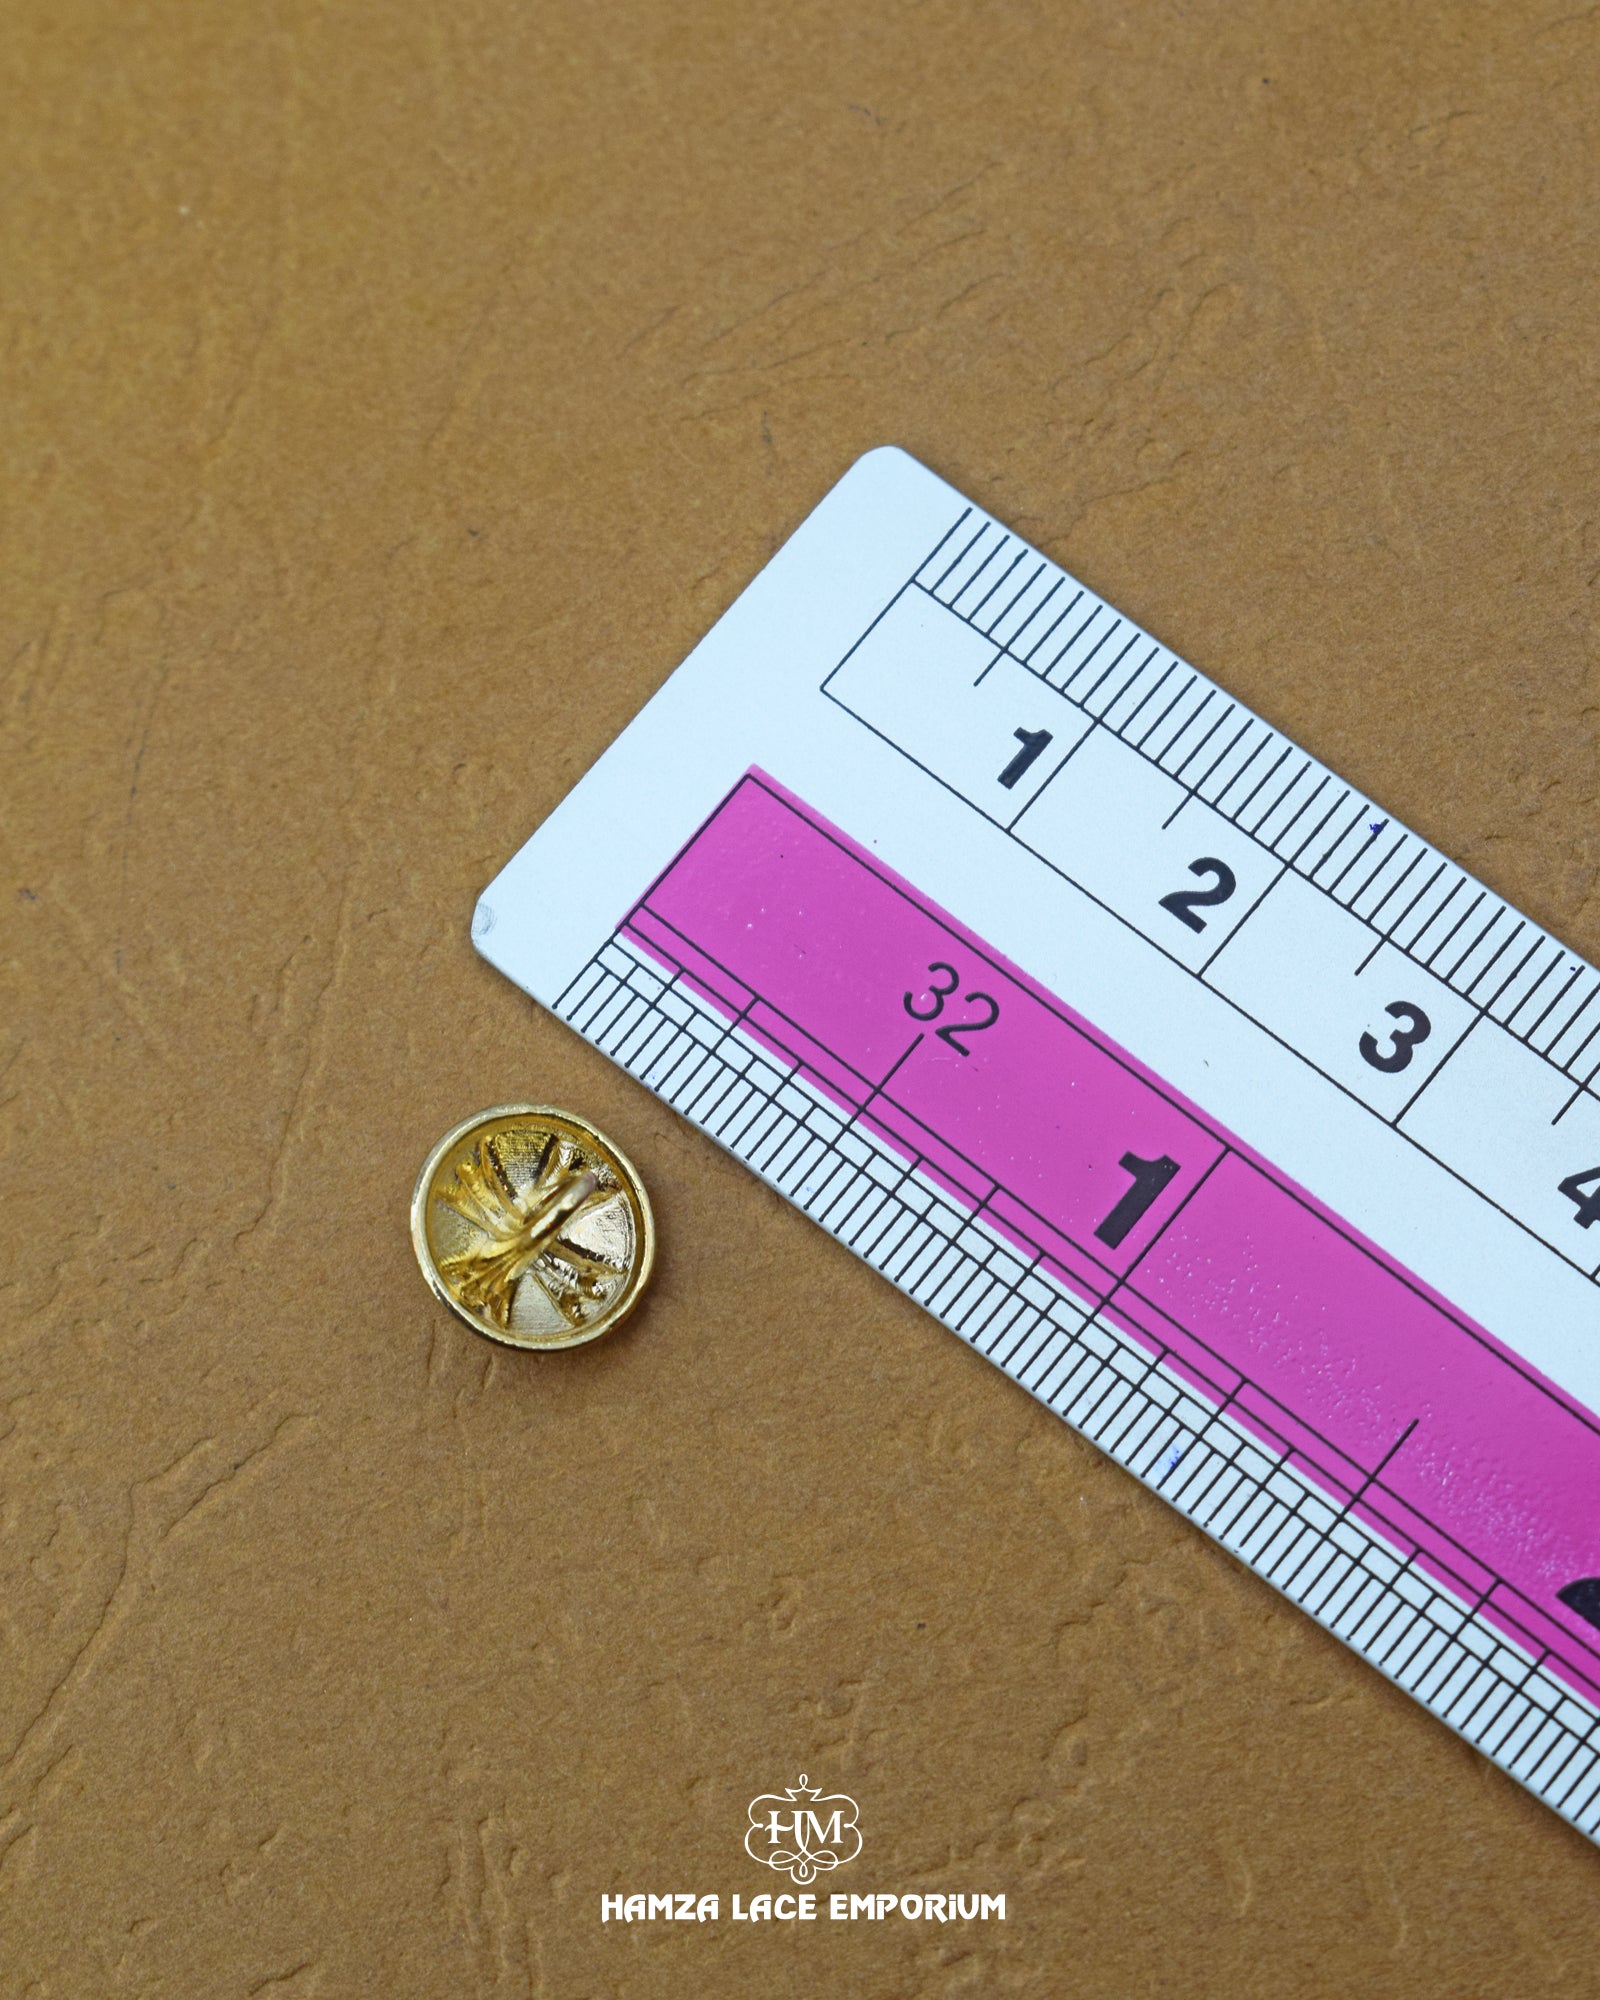 The dimensions of the 'Flower Design Golden Metal Button MB508' are determined using a ruler.